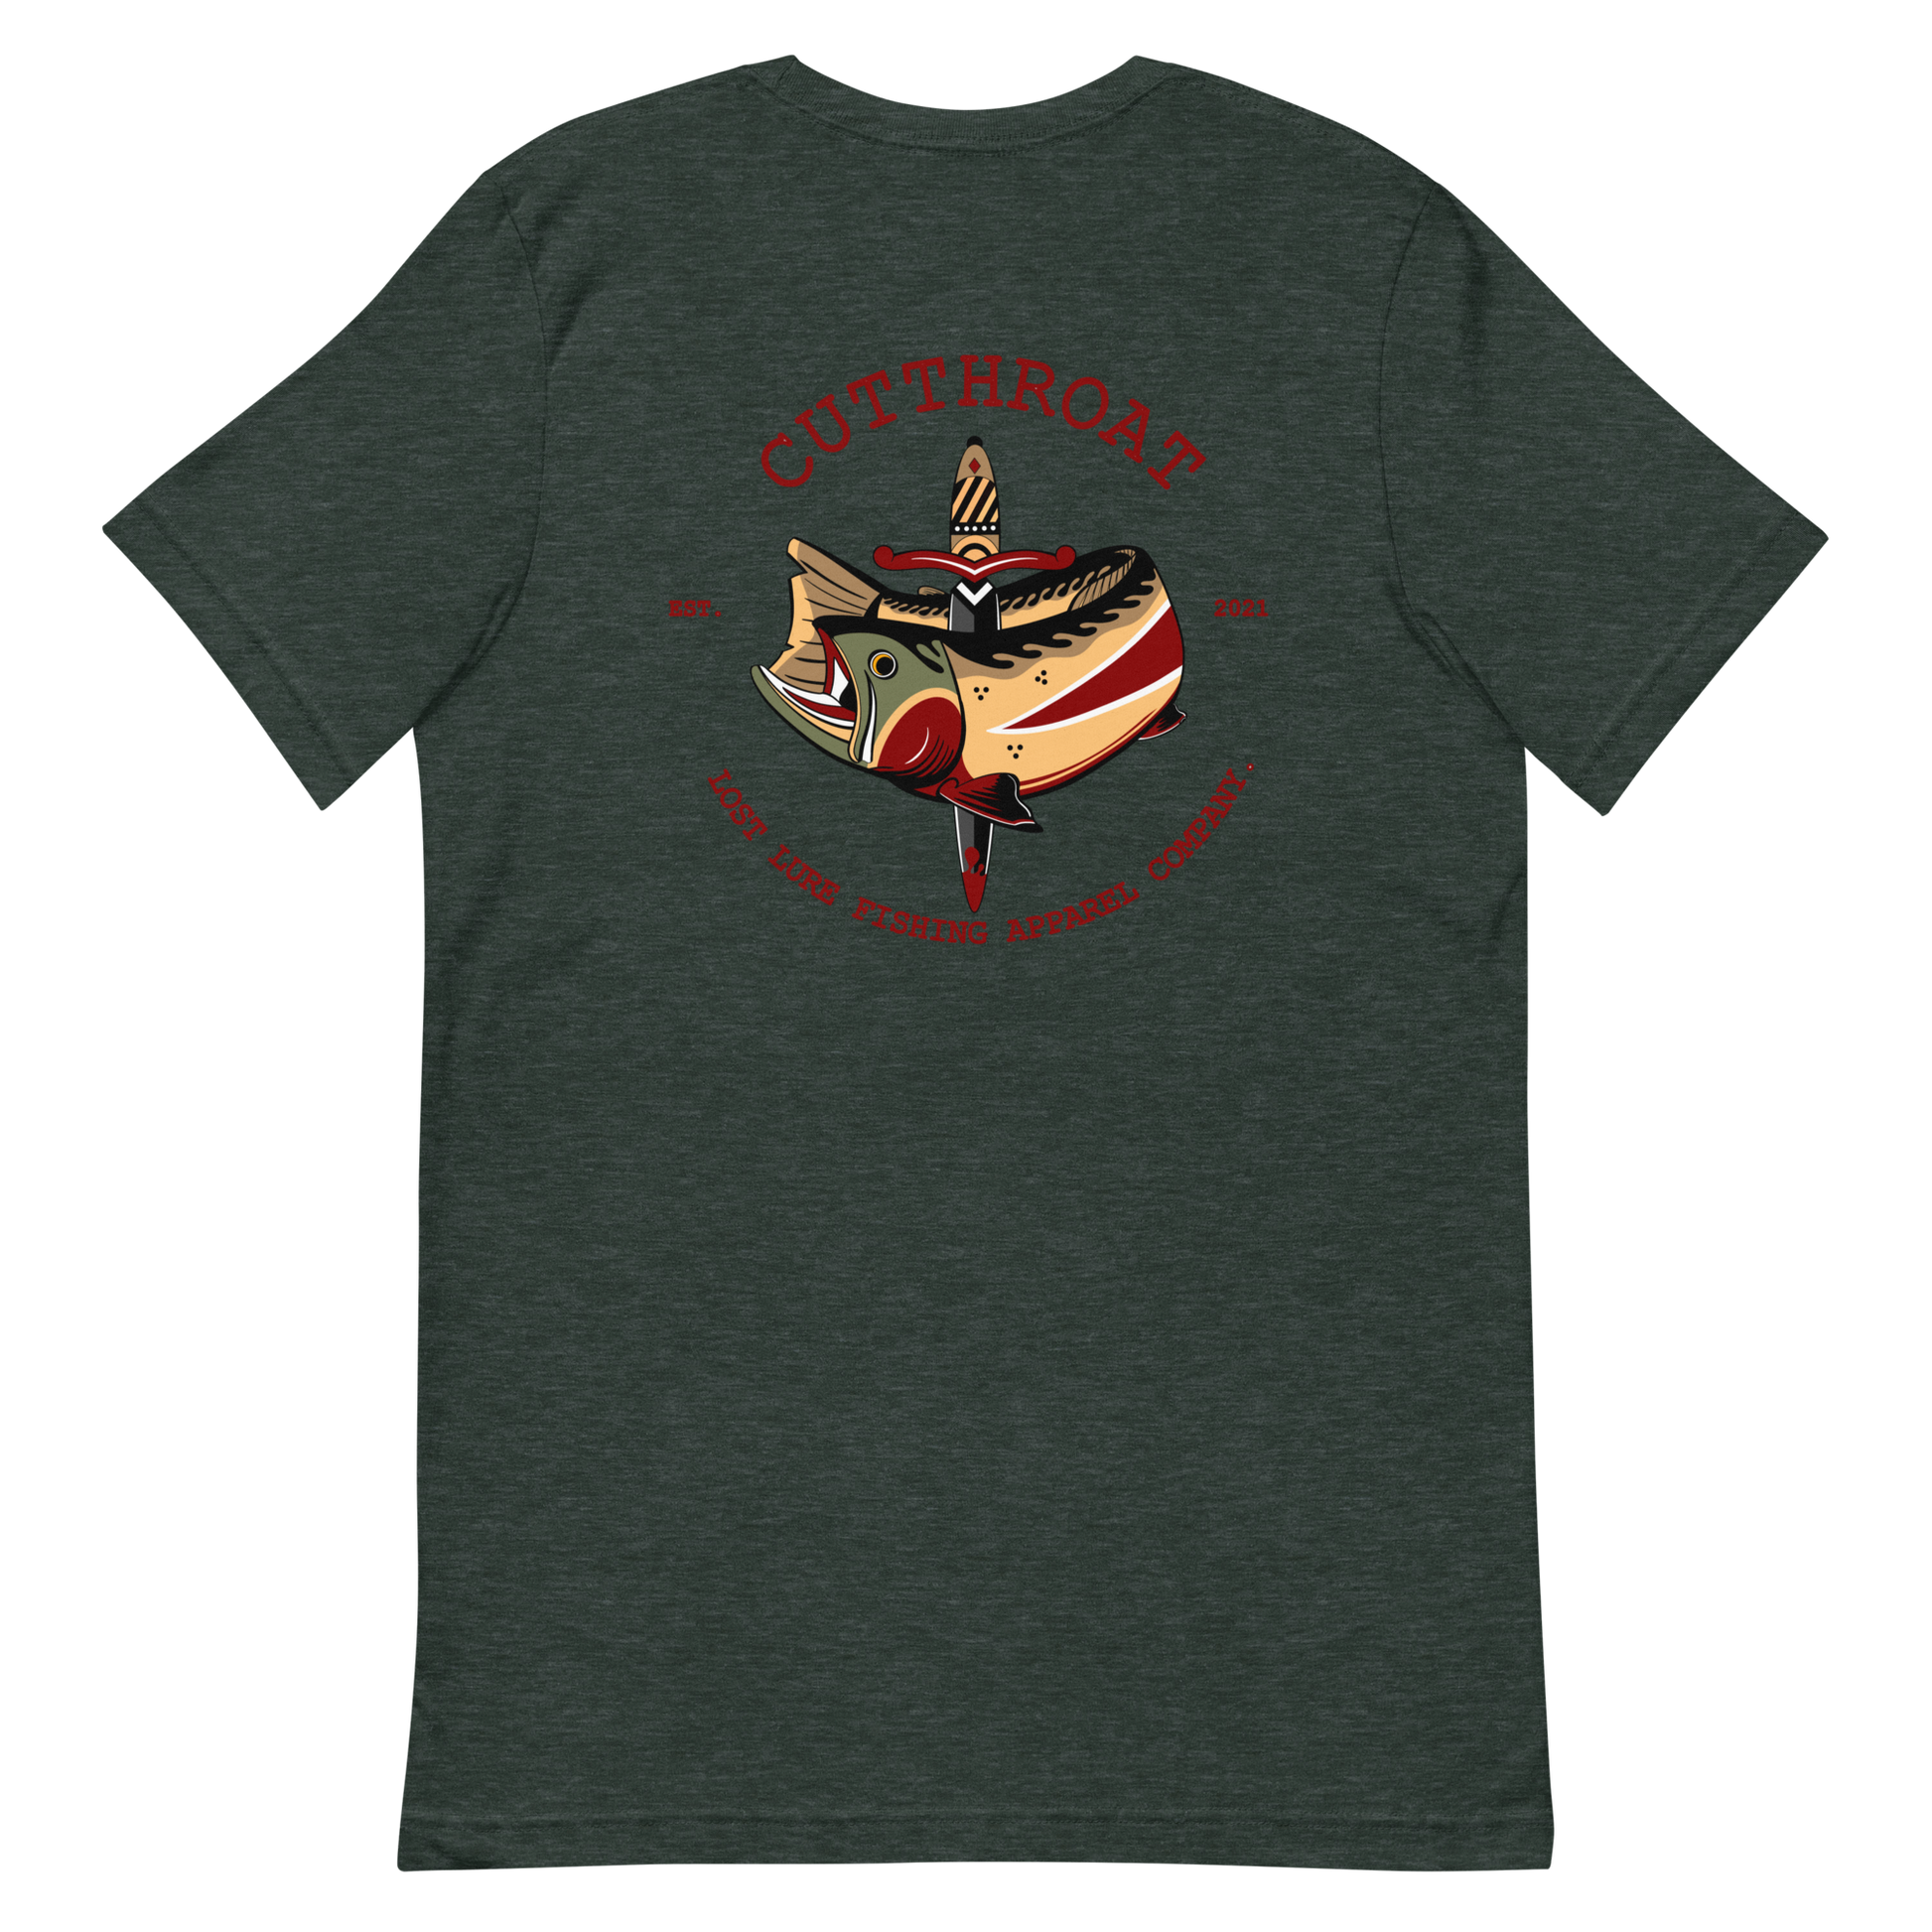 Cutthroat Trout fishing shirt. It’s an American traditional style design with a cutthroat trout and a dagger. The shirt reads Cutthroat trout, est. 2021, lost lure fishing apparel company. The front of the shirt has the lost lure logo. Forrest green fishing shirt, back side